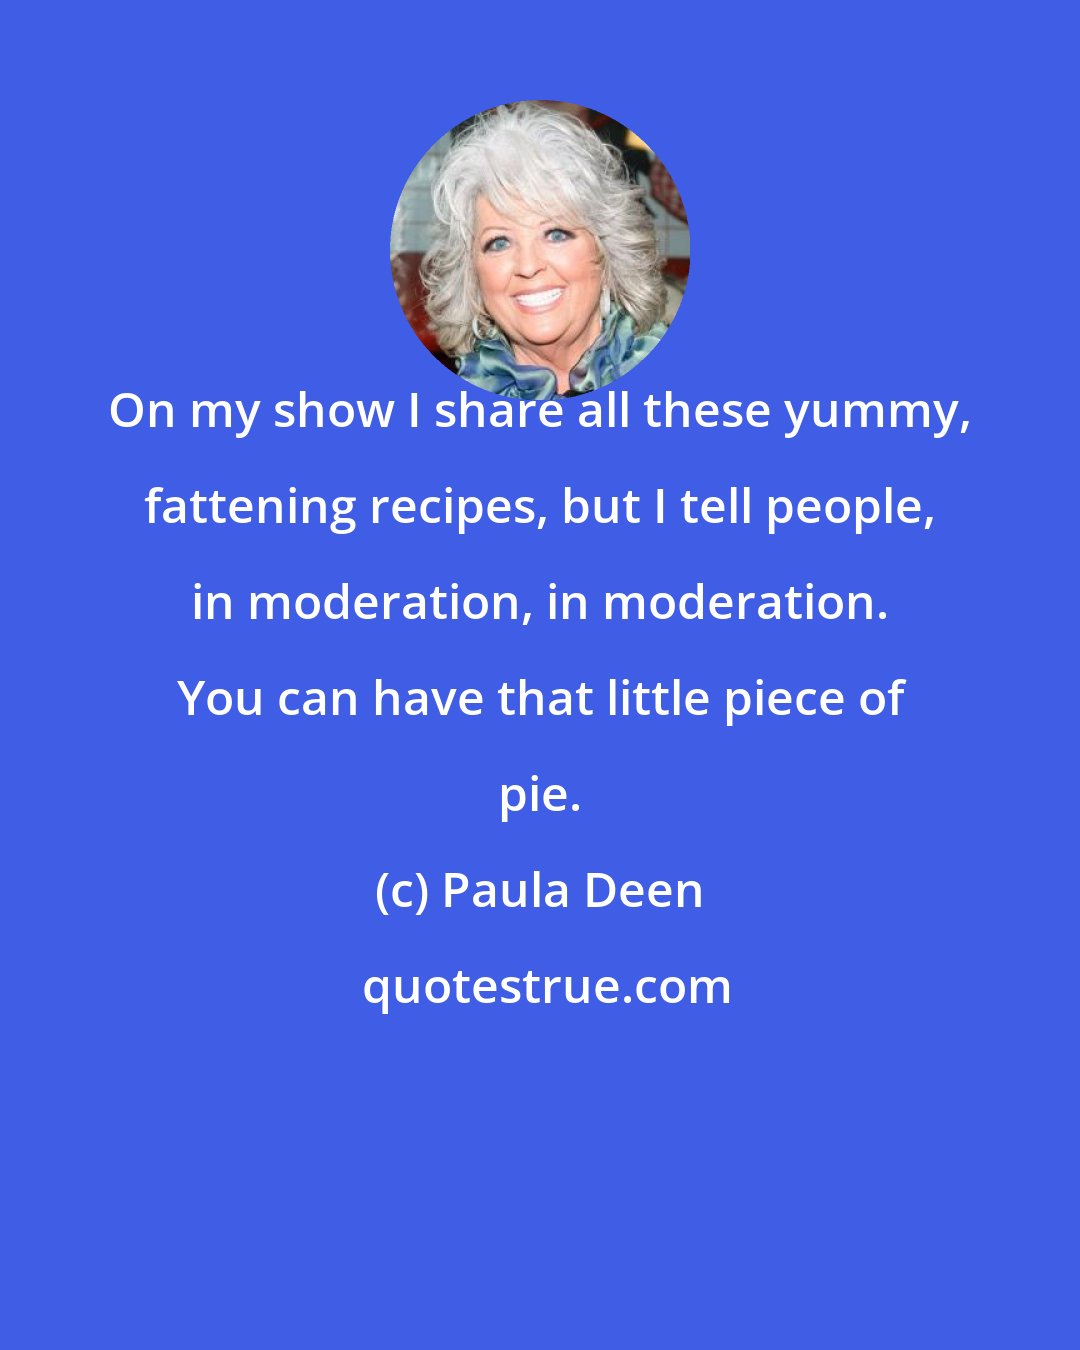 Paula Deen: On my show I share all these yummy, fattening recipes, but I tell people, in moderation, in moderation. You can have that little piece of pie.